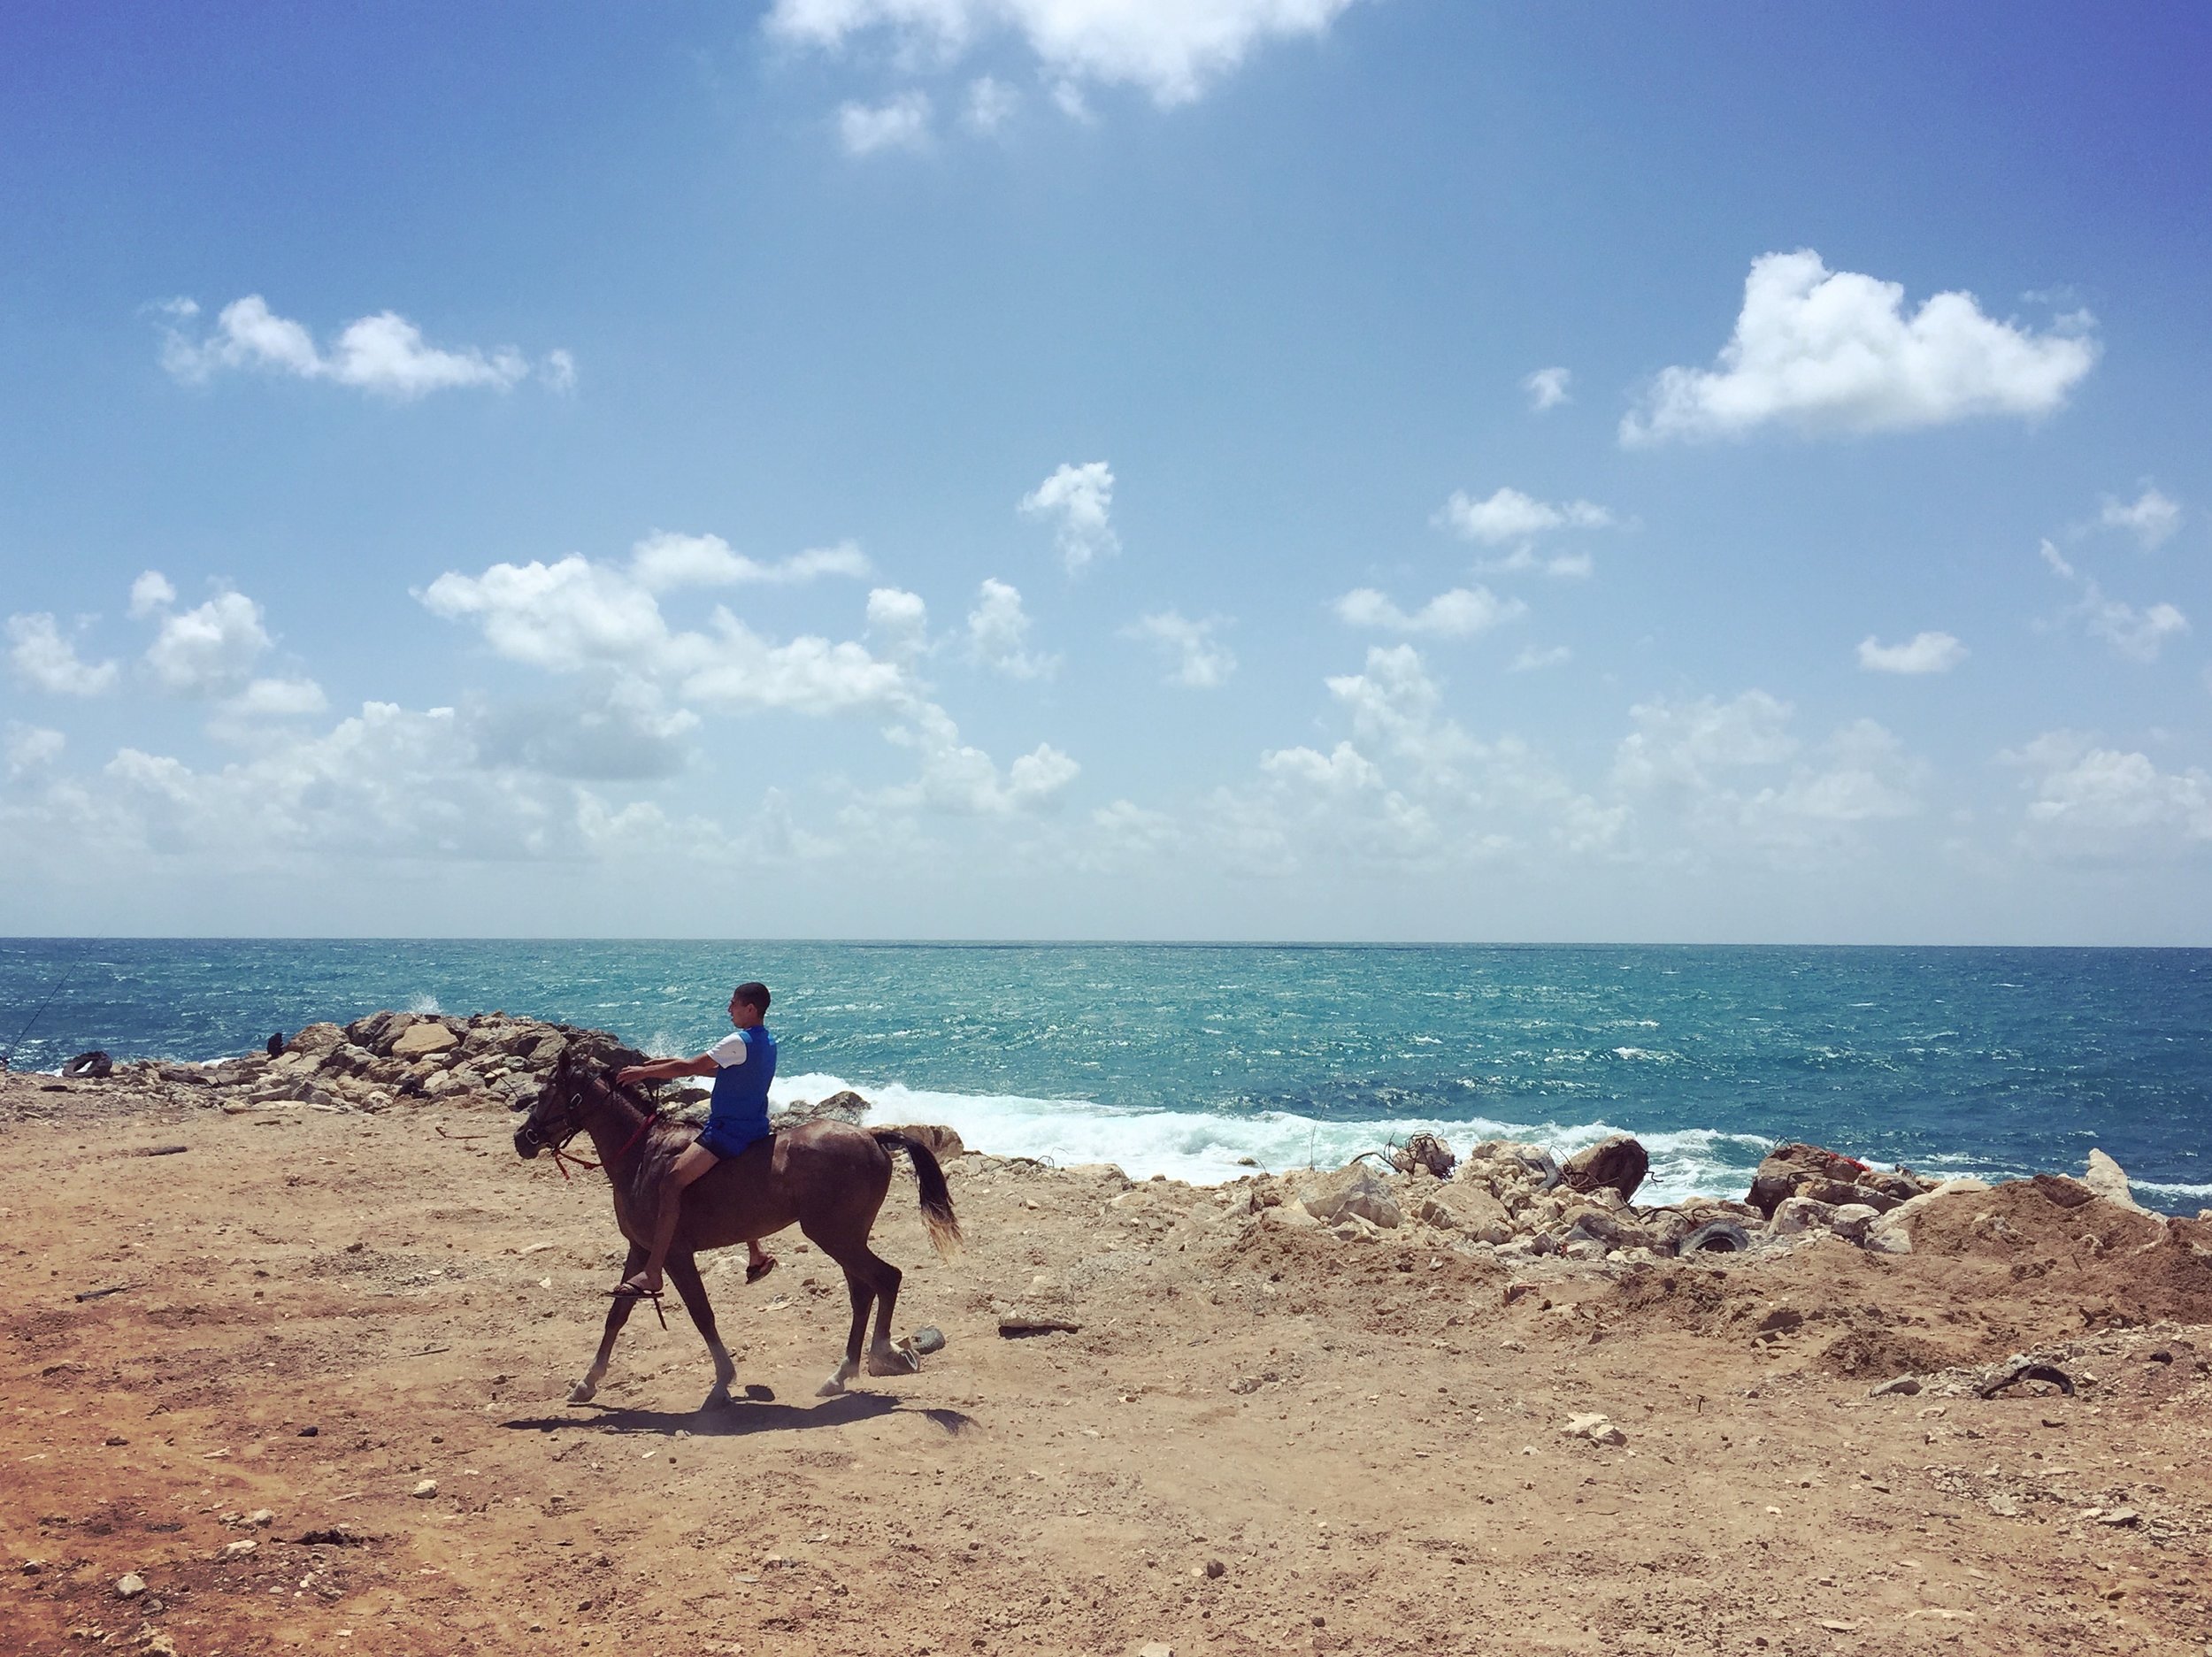  JAFFA | Boy rides a horse along the beach in the old city of Jaffa. May 27, 2016.&nbsp; 